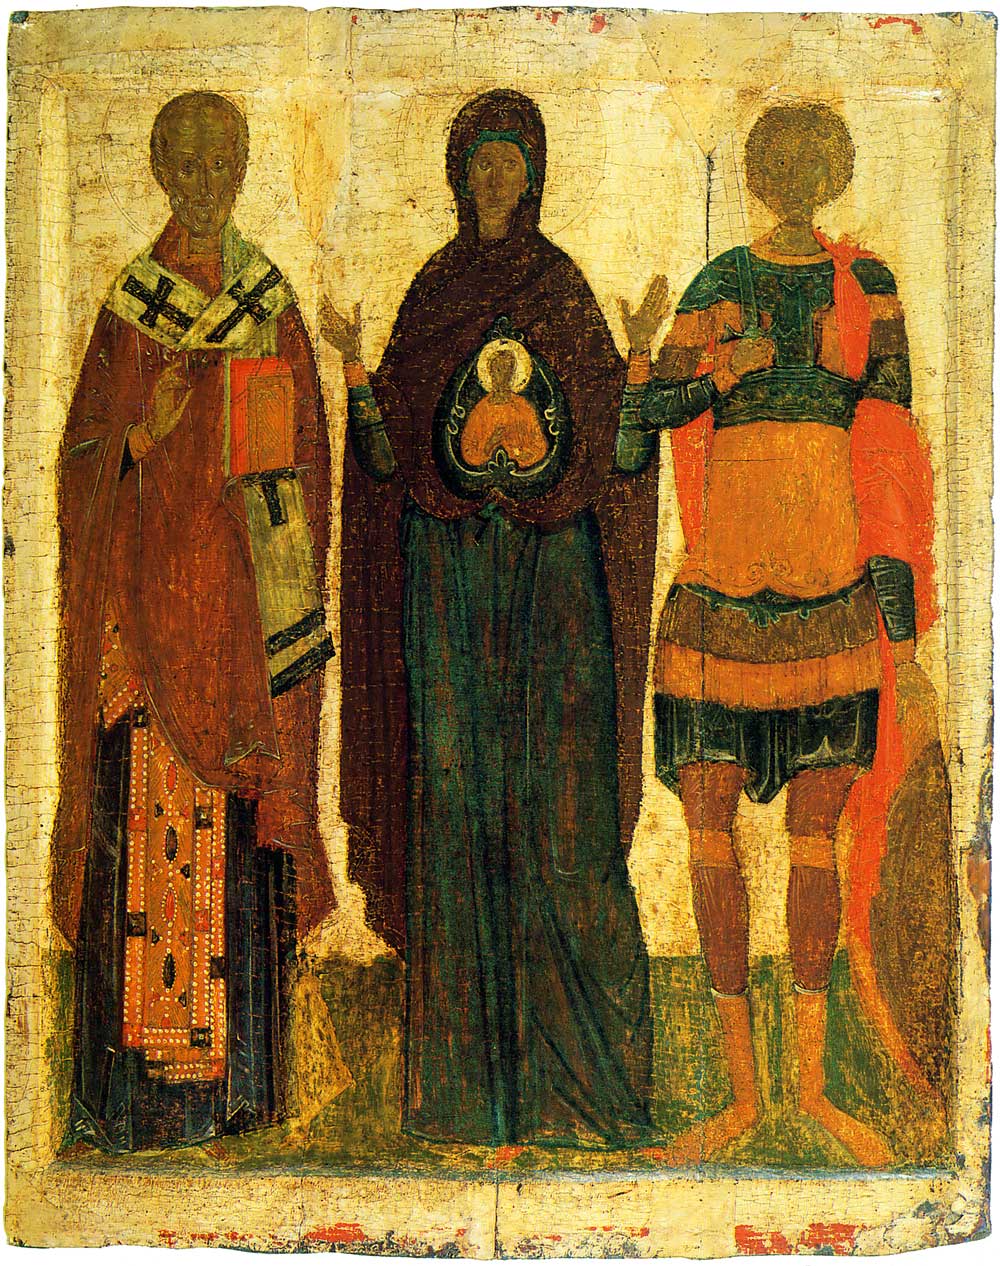 Theotokos Great Panagia with saints Nicholas and George. The Pskov icon from Church of Reserection in Rakuly village in Archangel region. Late XV. State Tretyakov Gallery